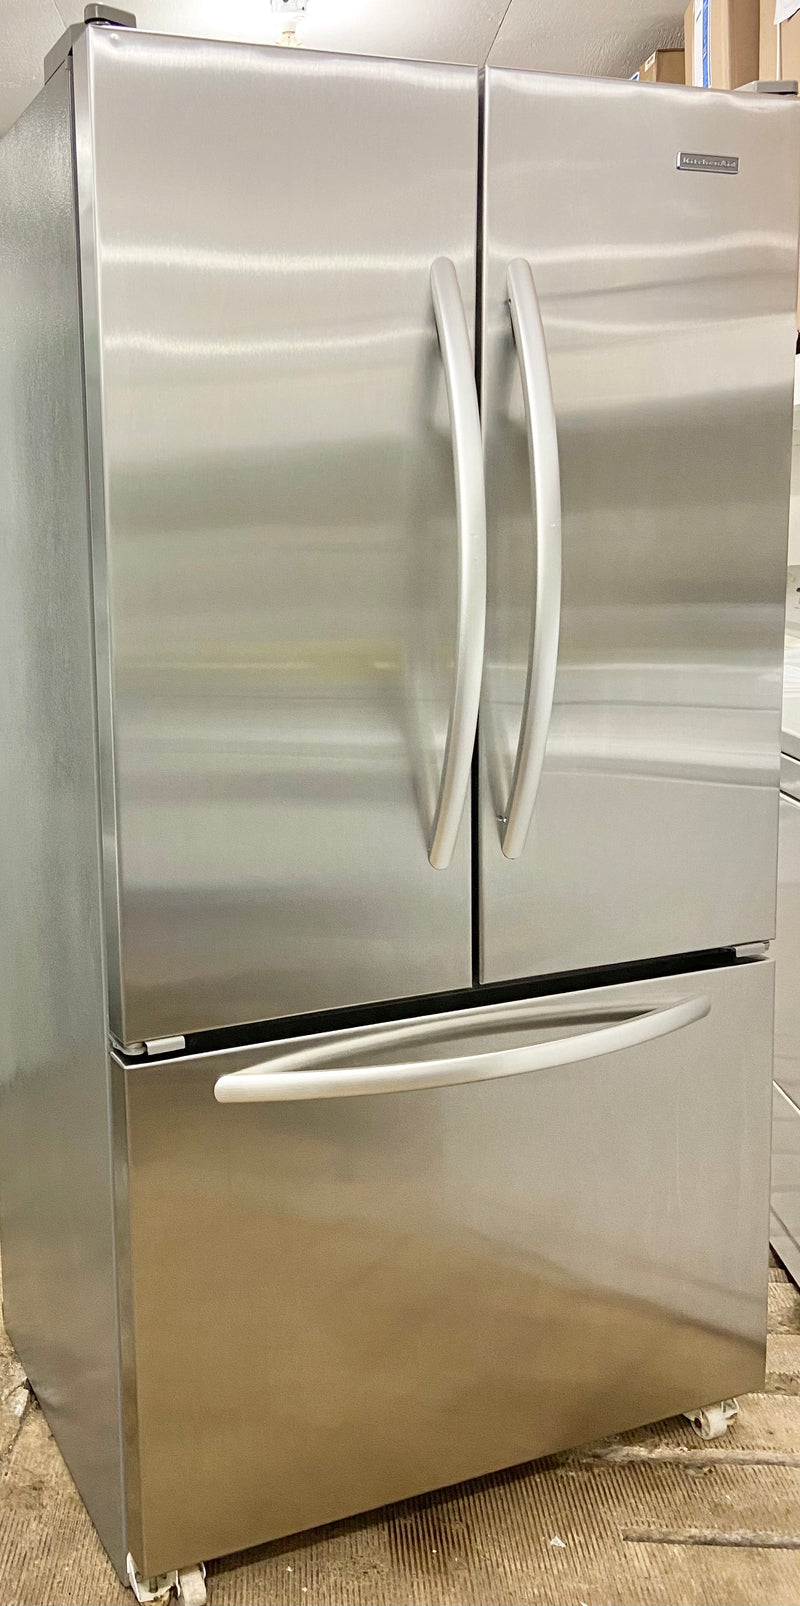 KitchenAid 36'' Wide Stainless Steel French Door Fridge with Water and Ice Maker, Free 60 Day Warranty